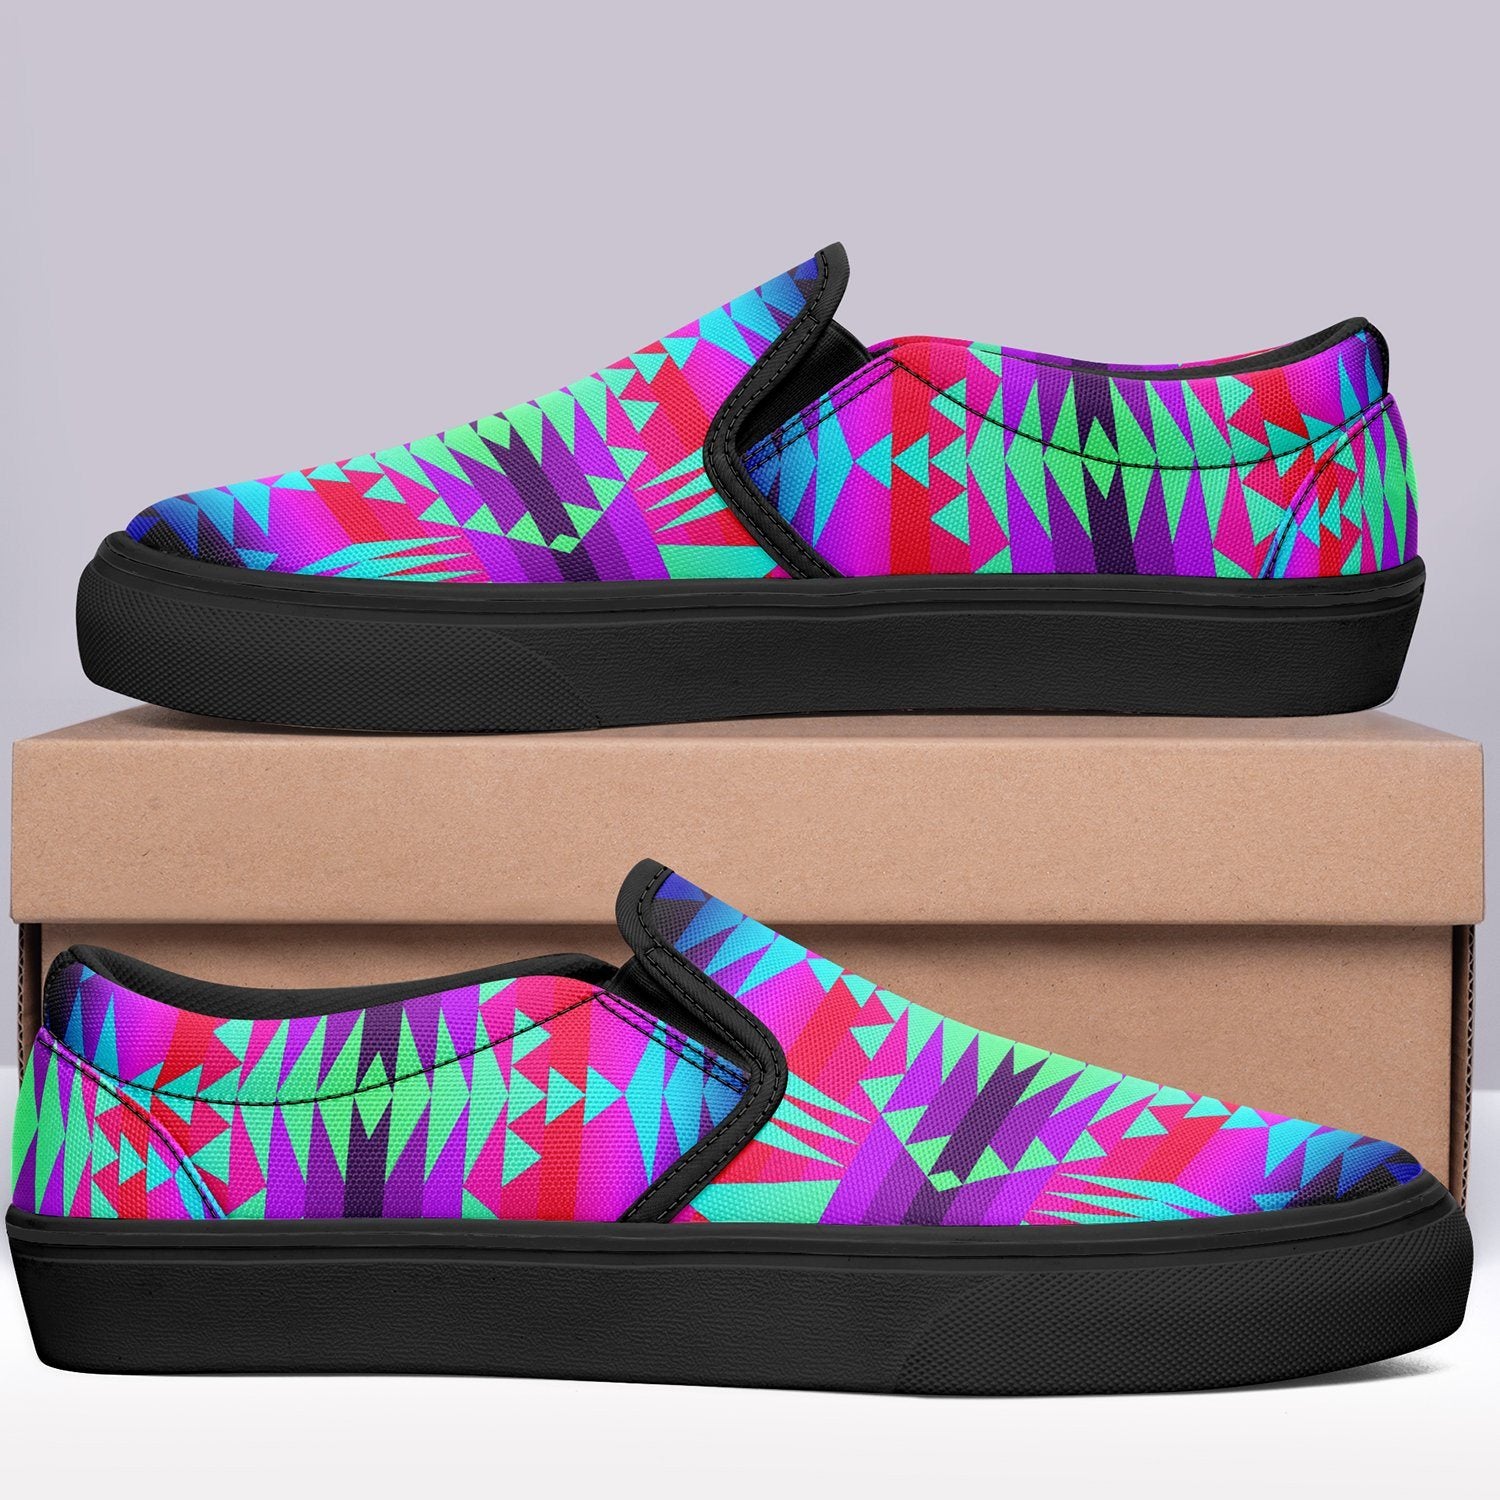 Between the Rocky Mountains Otoyimm Canvas Slip On Shoes 49 Dzine 